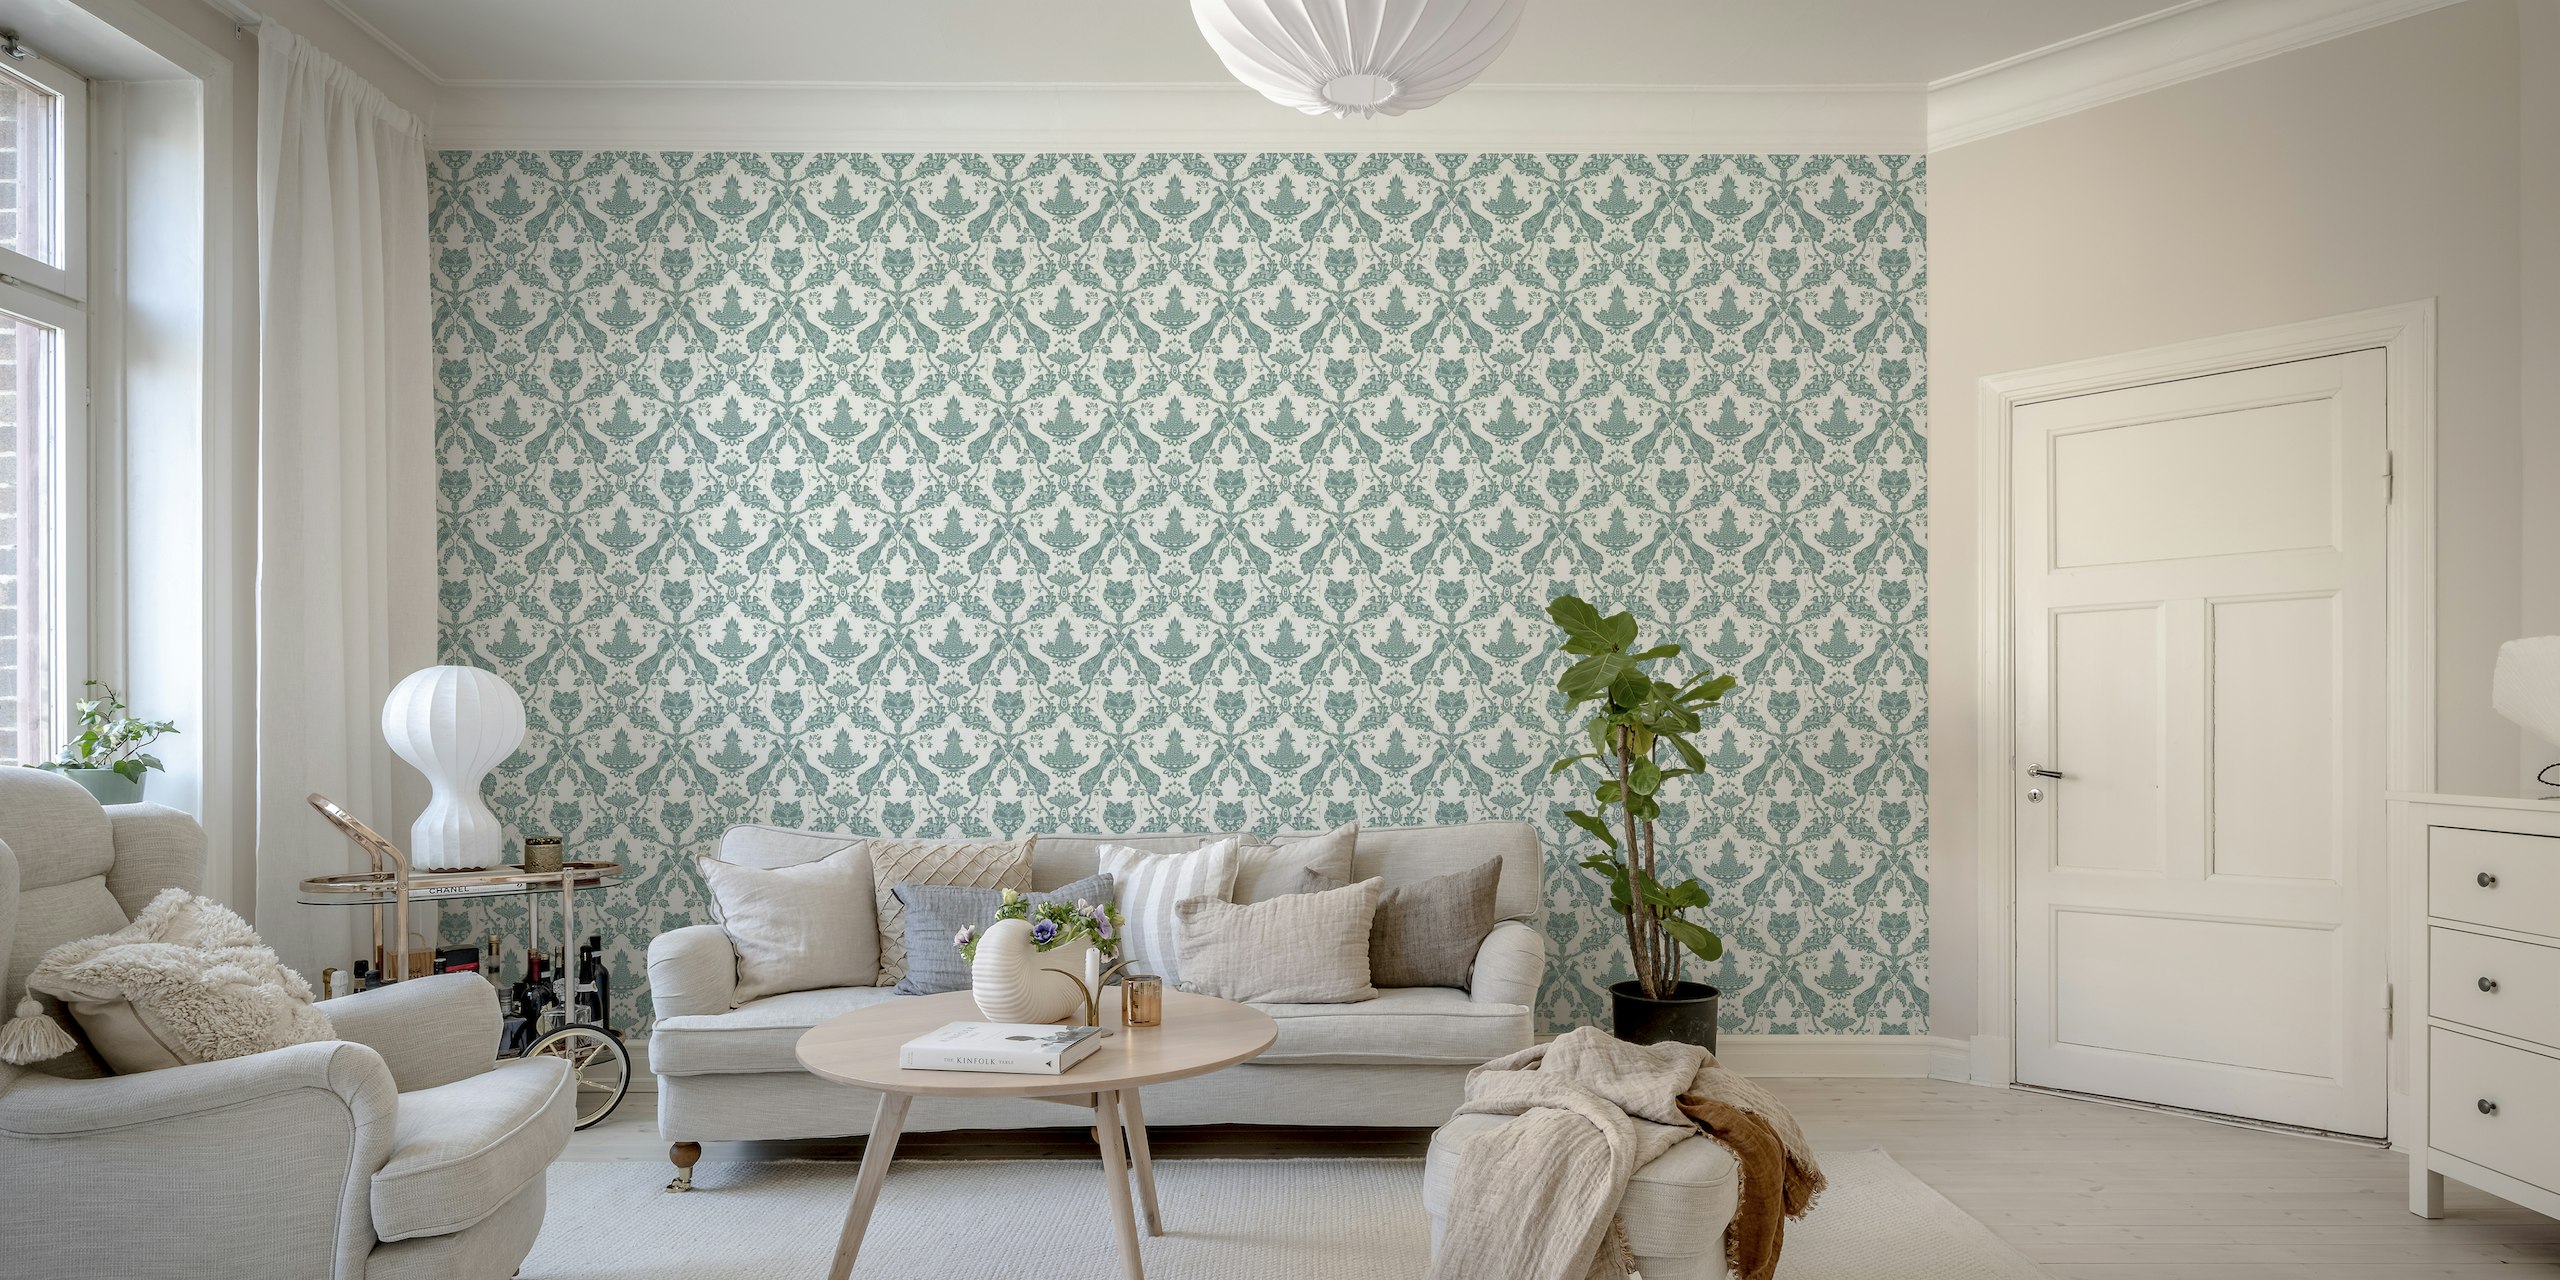 Peacock damask with fruit bowls wallpaper